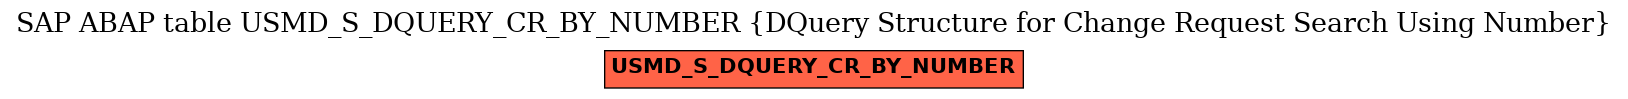 E-R Diagram for table USMD_S_DQUERY_CR_BY_NUMBER (DQuery Structure for Change Request Search Using Number)